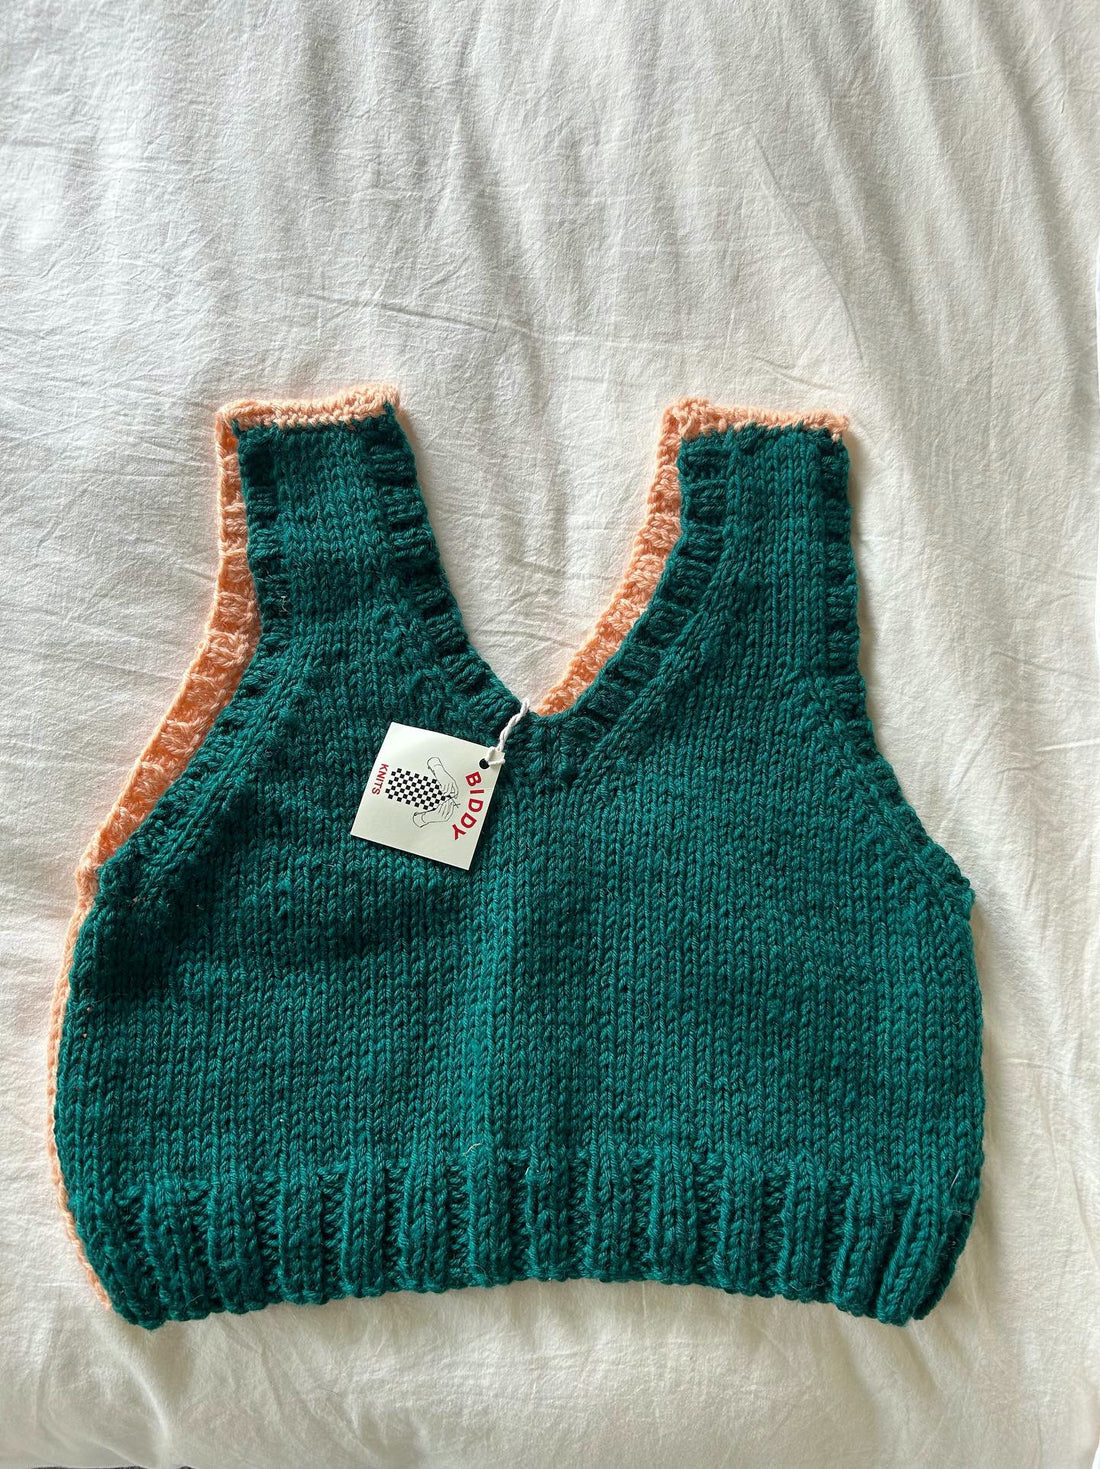 Reversible knitted vests - 5 colours